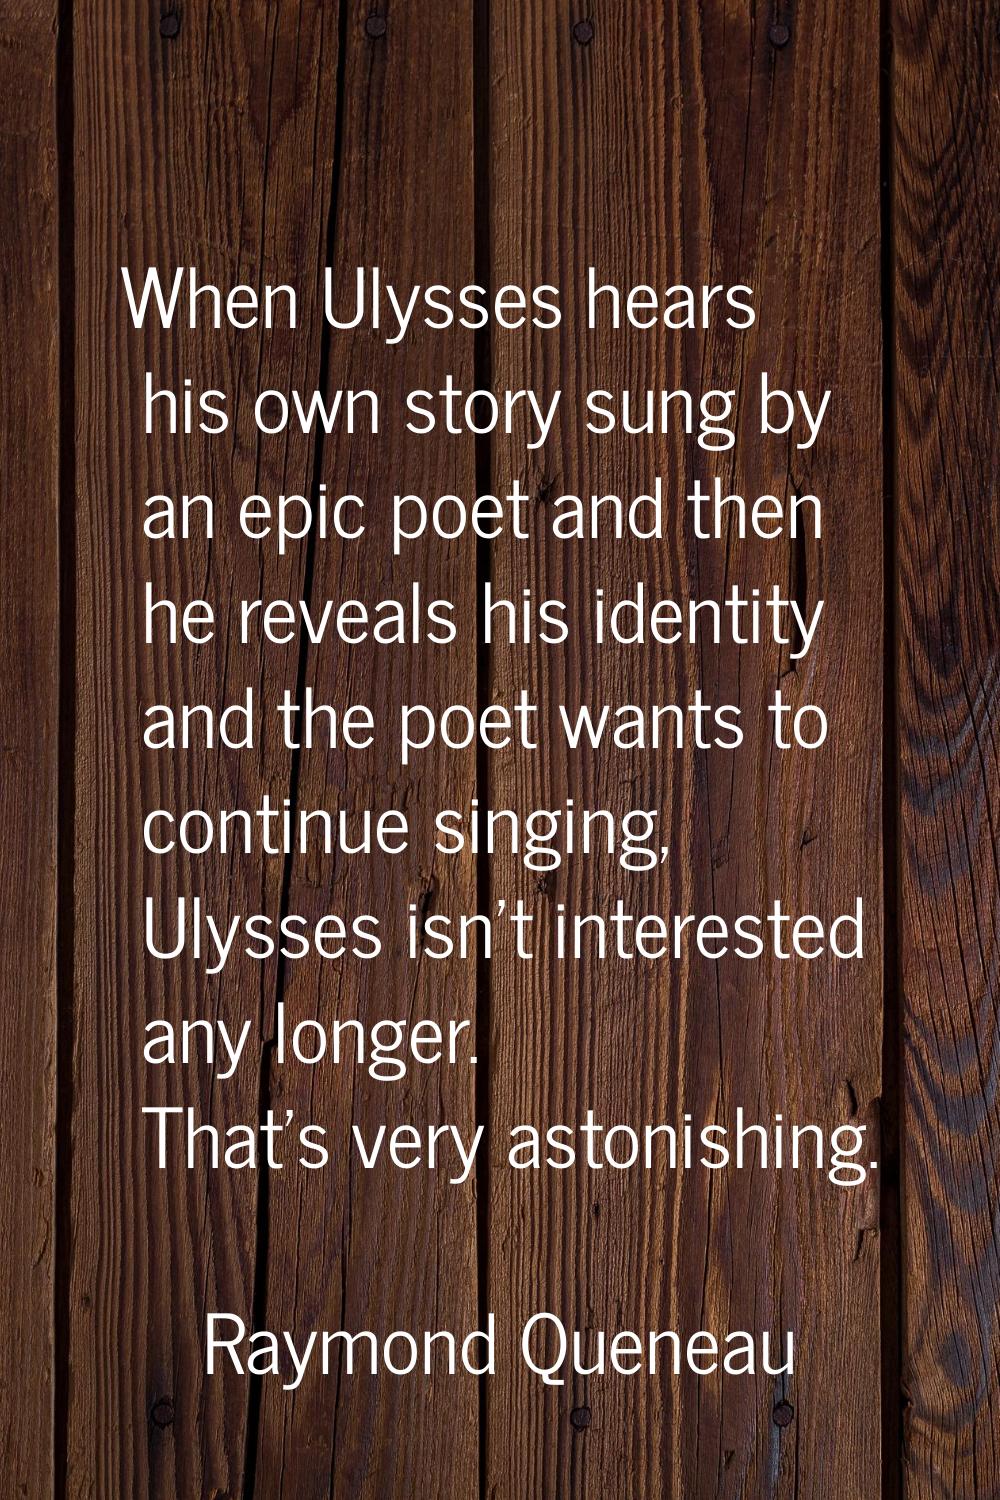 When Ulysses hears his own story sung by an epic poet and then he reveals his identity and the poet